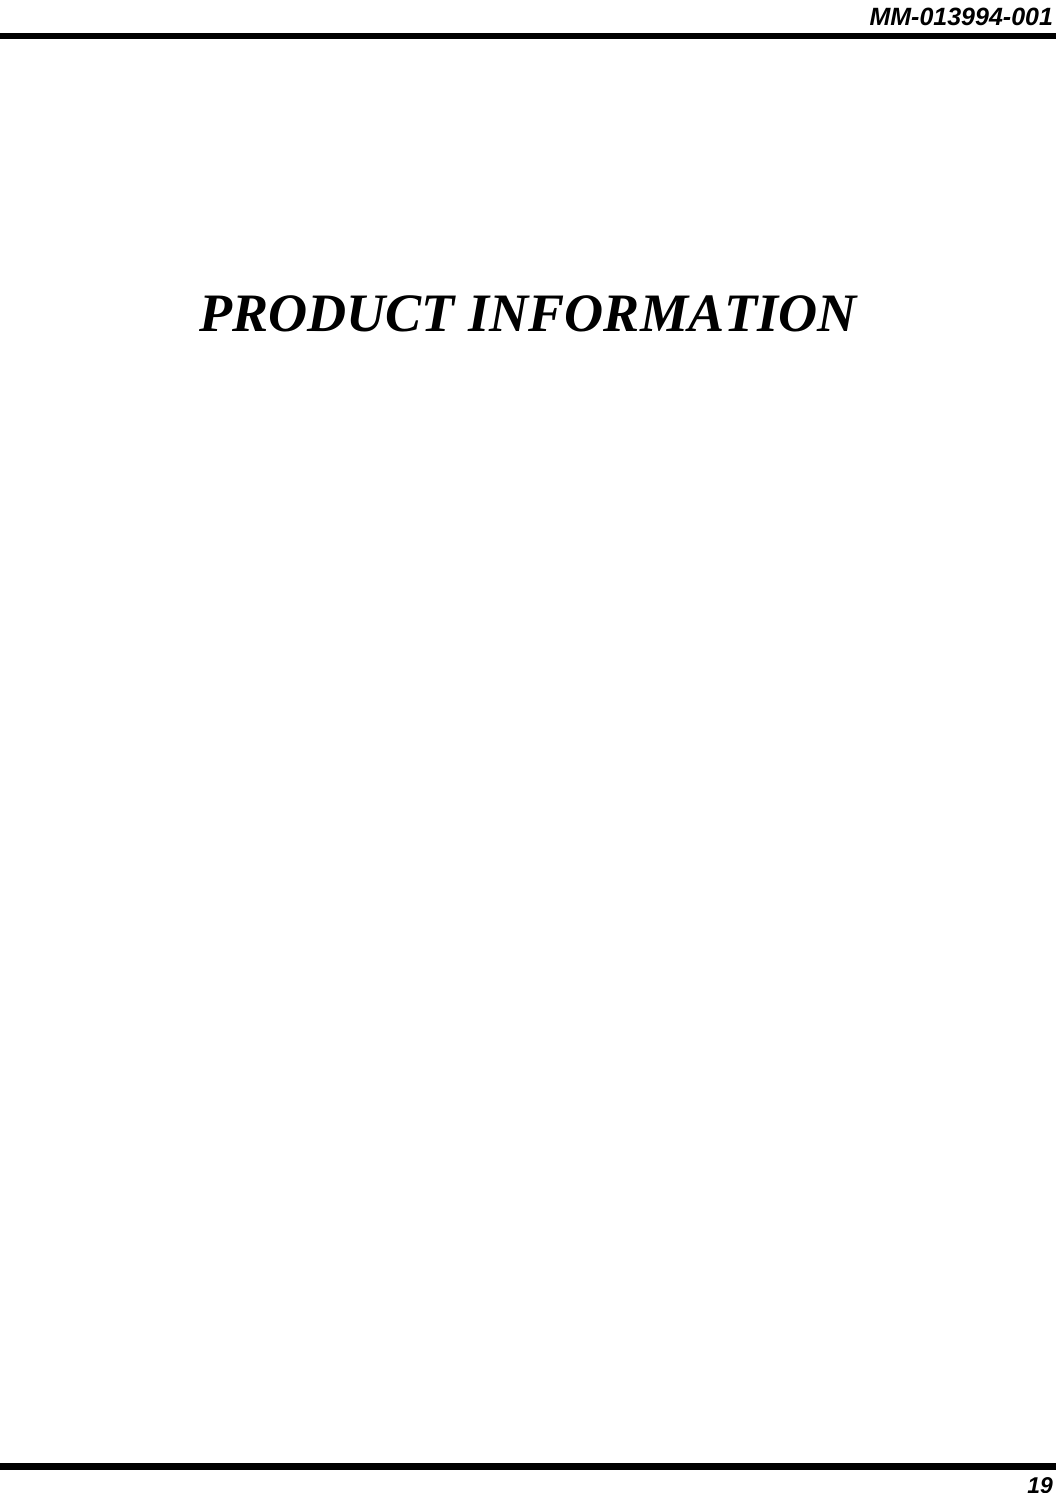 MM-013994-001 19 PRODUCT INFORMATION 